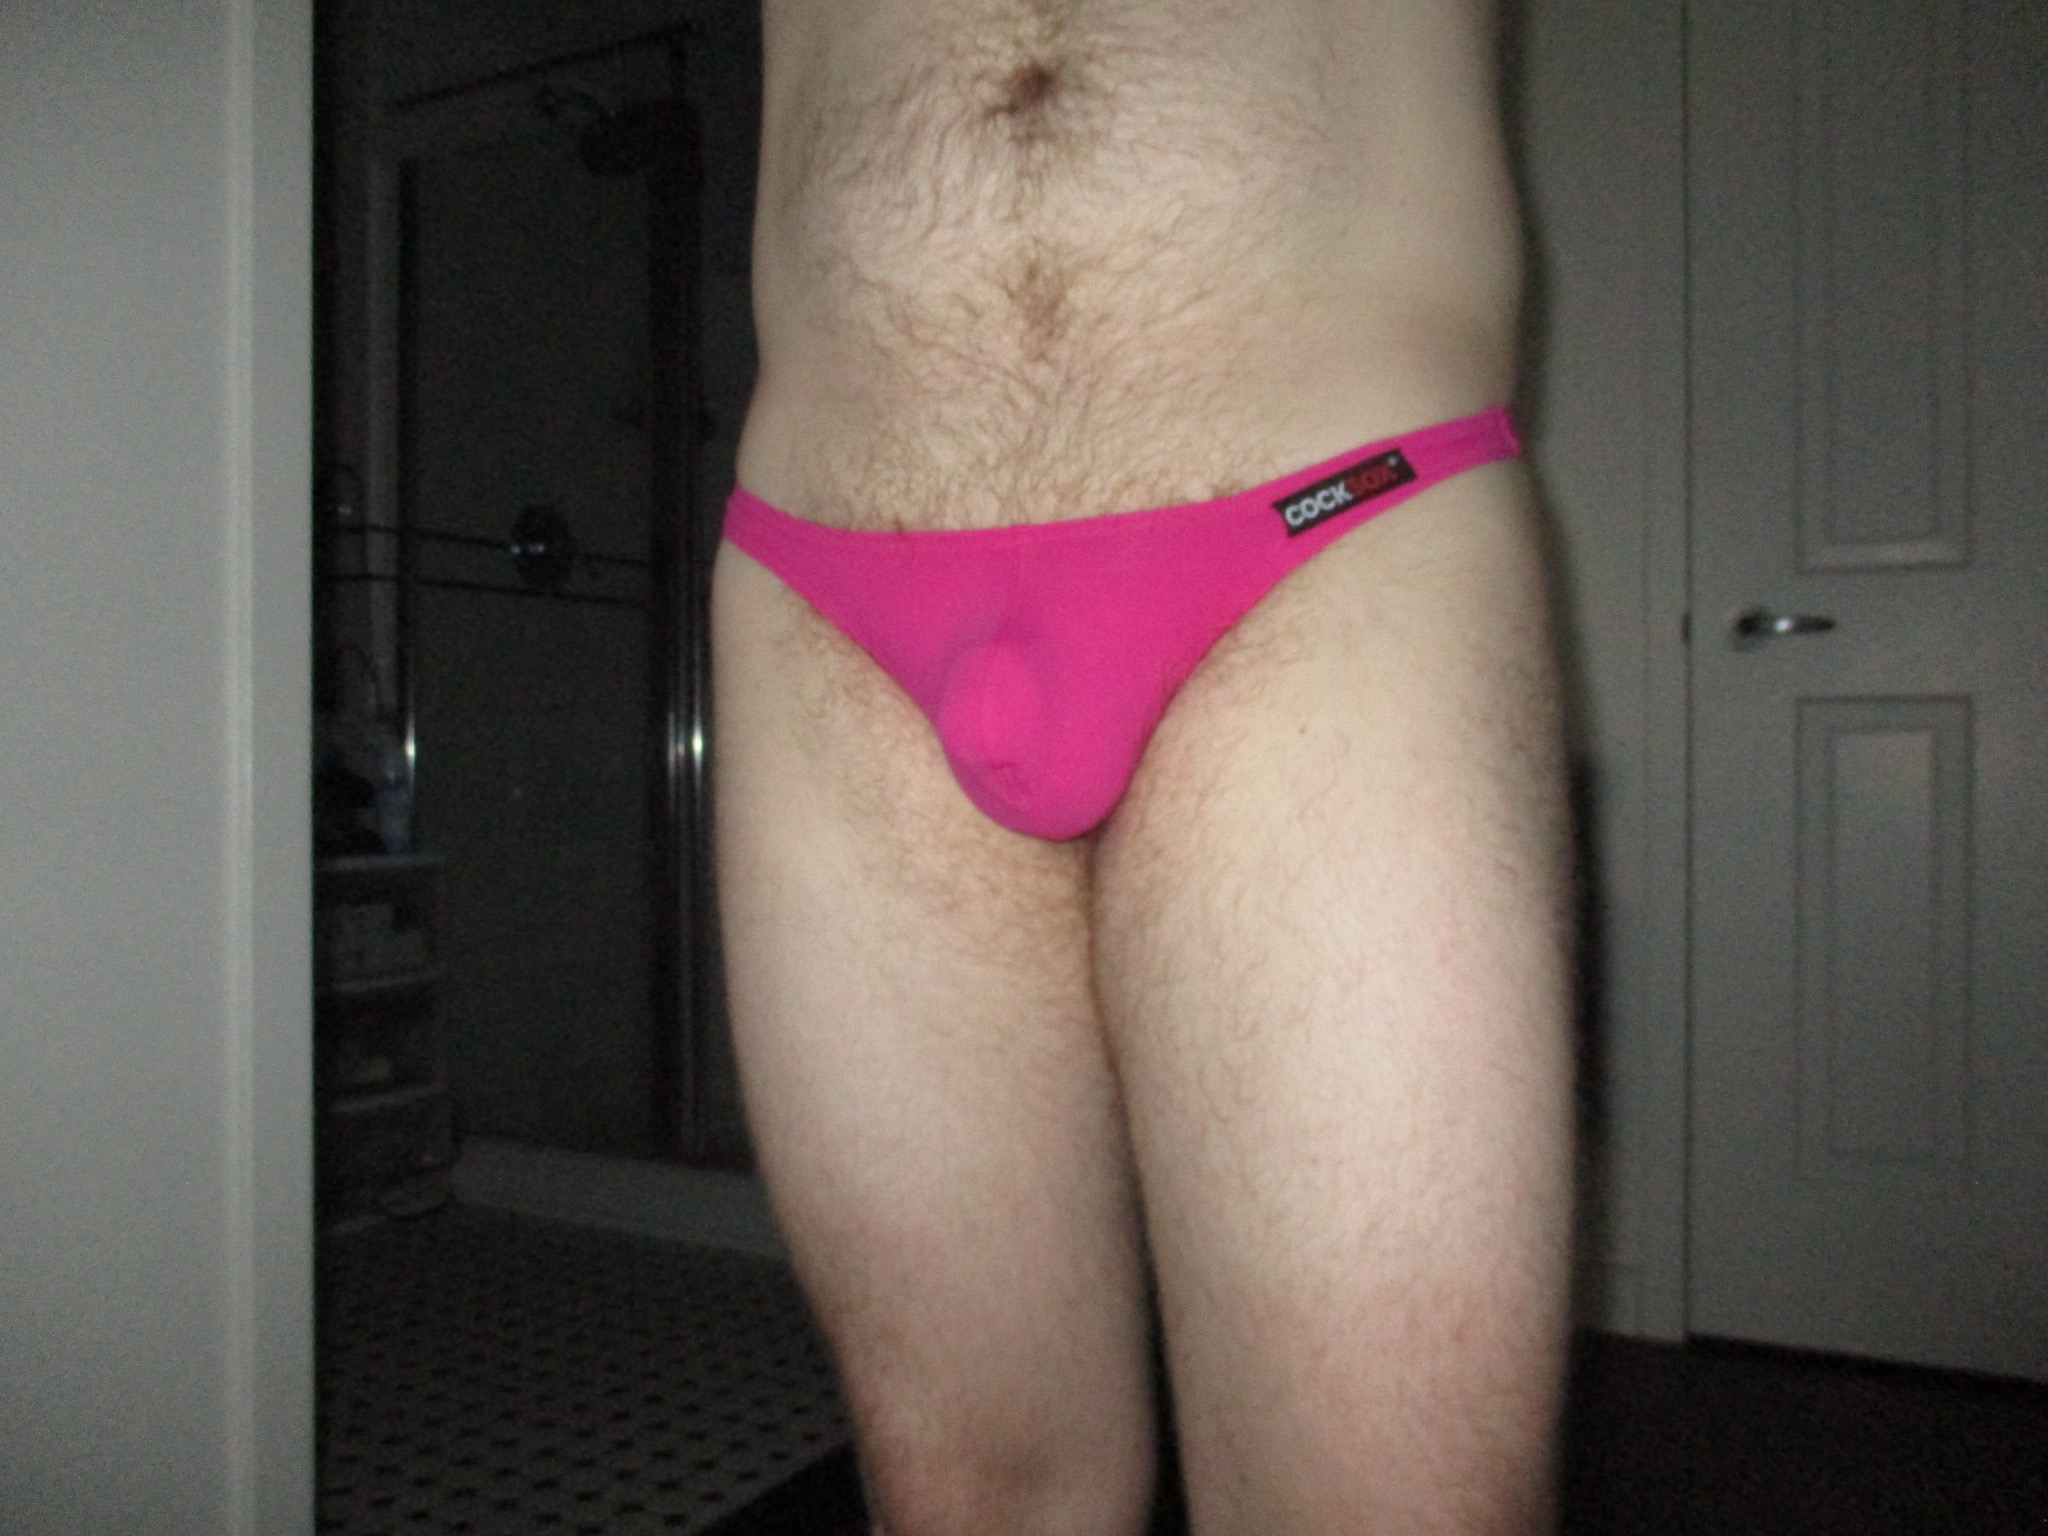 Punk Pink is a great colour choice for a thong!